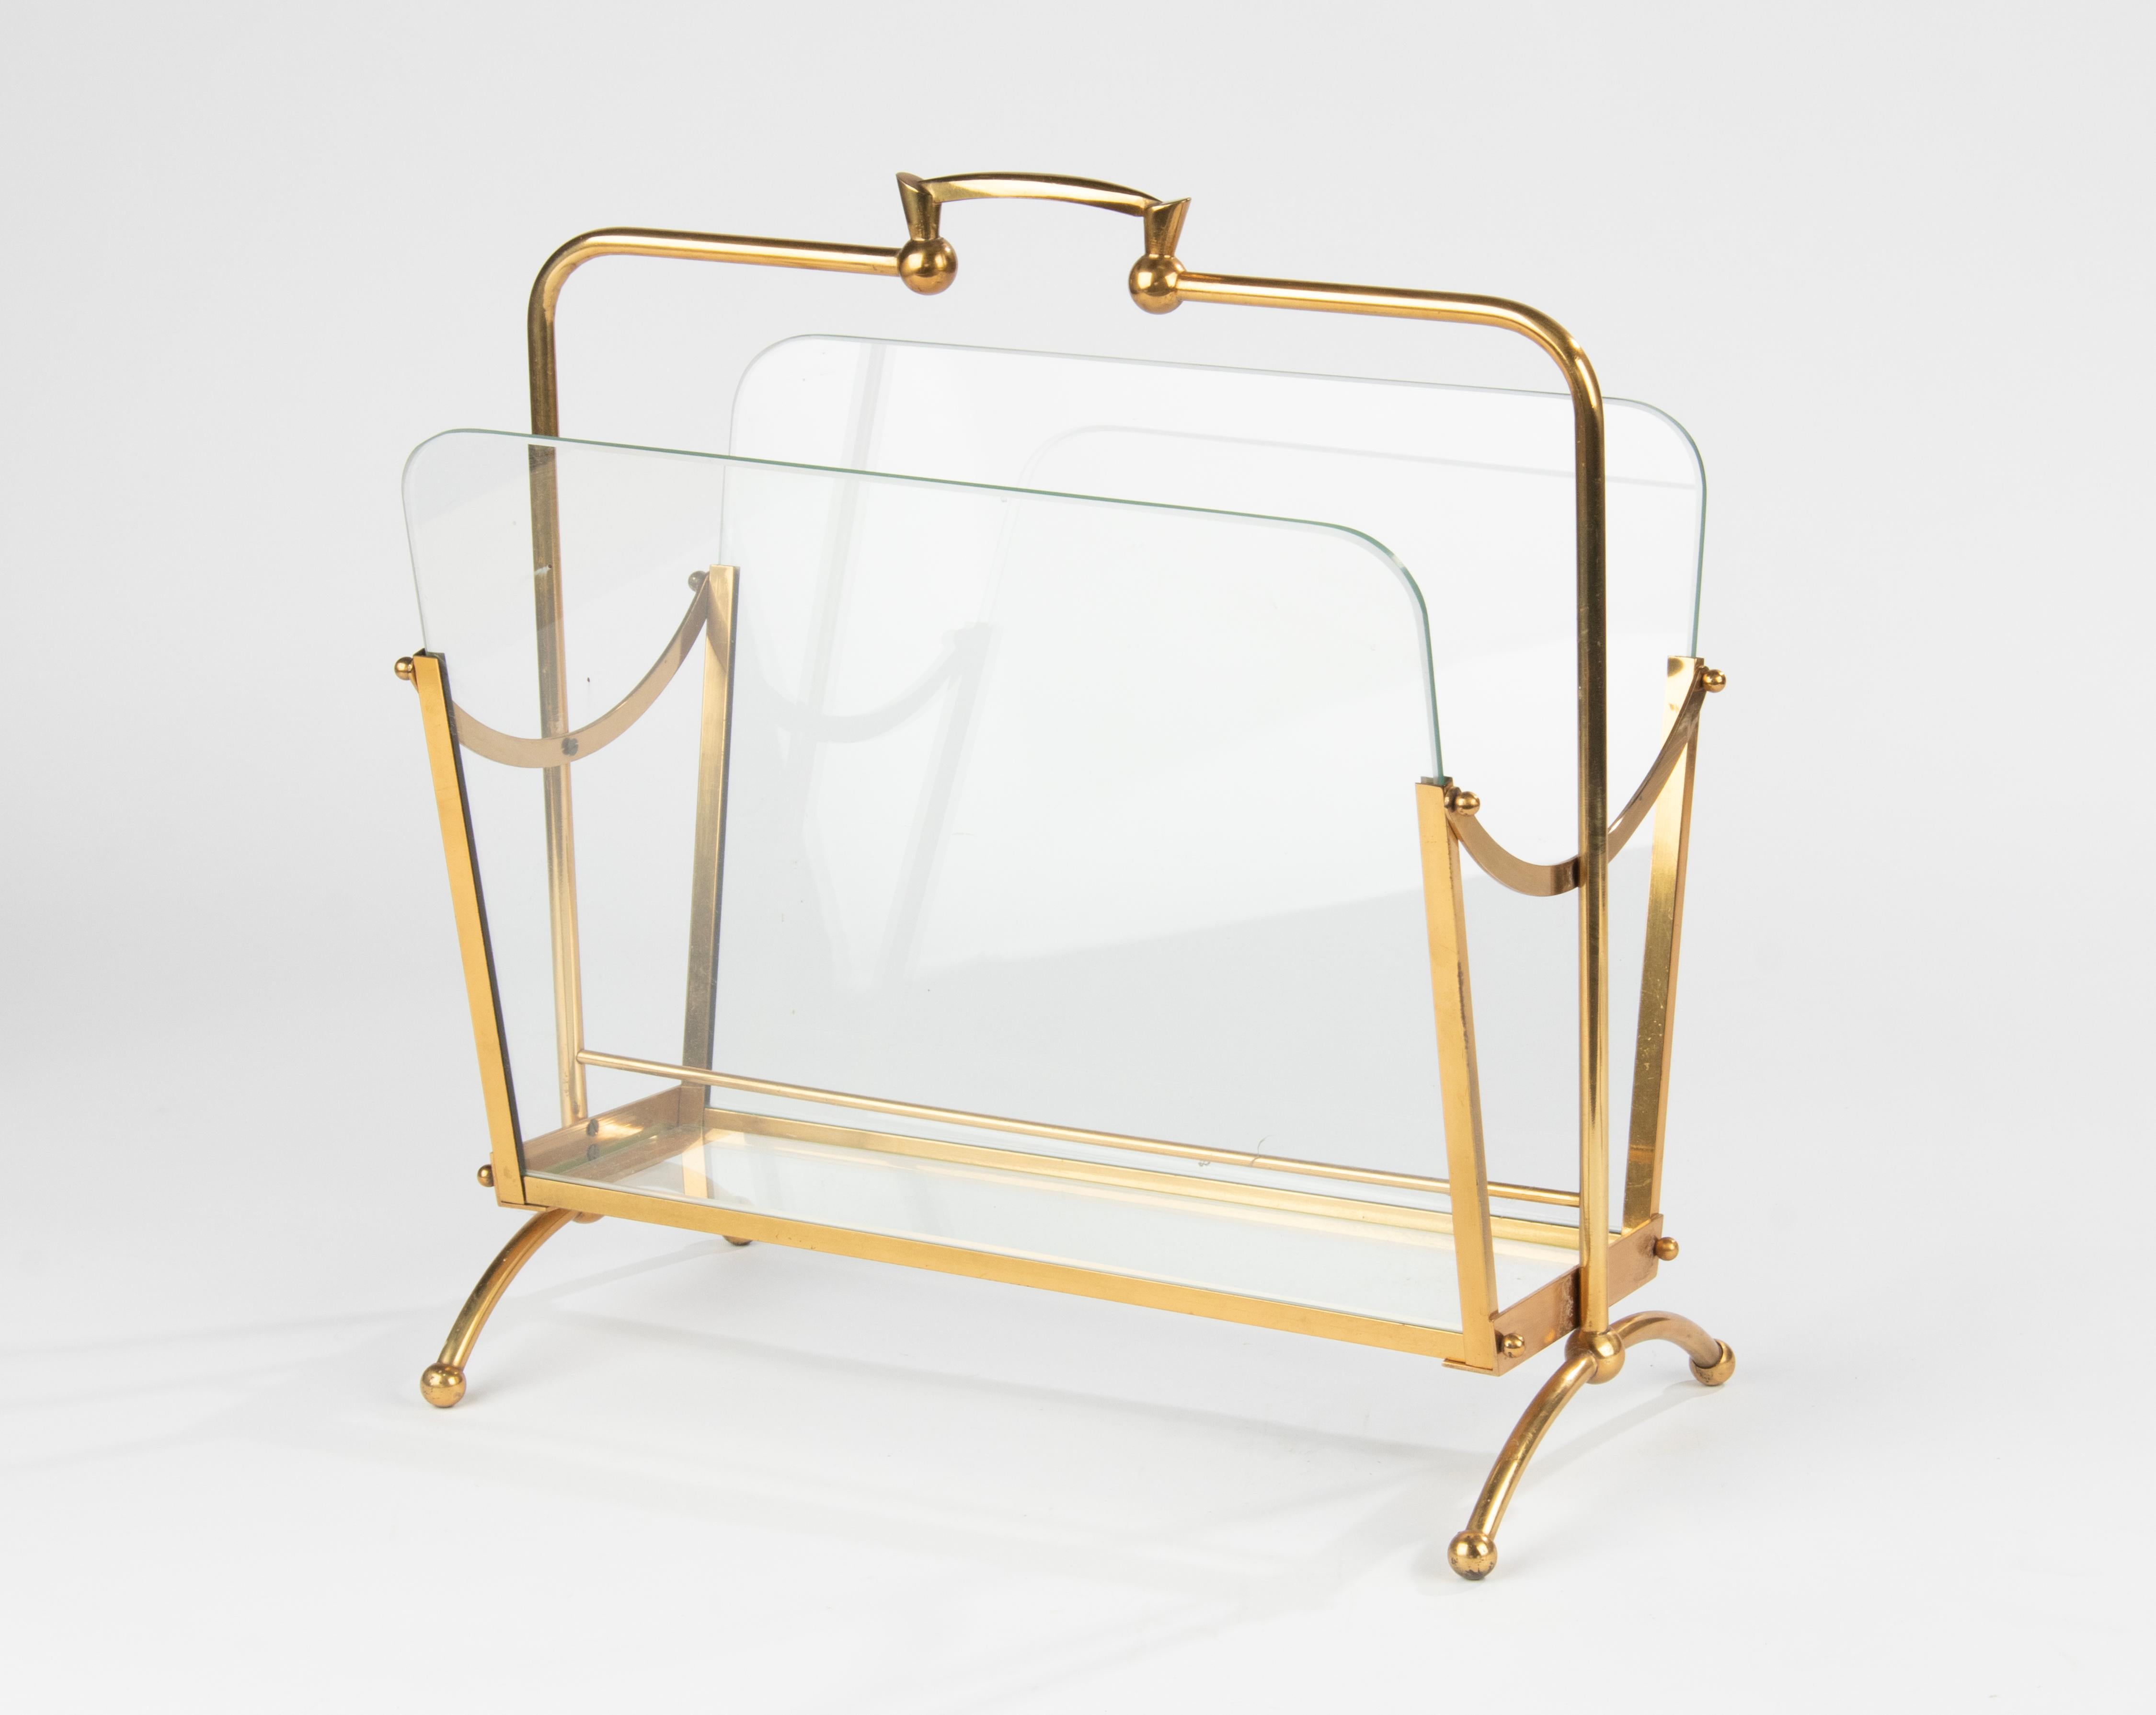 An Hollywood Regency style magazine rack/stand, made of brass colored metal. It has two compartments, divided by glass panels. The rack is in good condition, it is sturdy and stable, structurally correct. Made in Belgium around